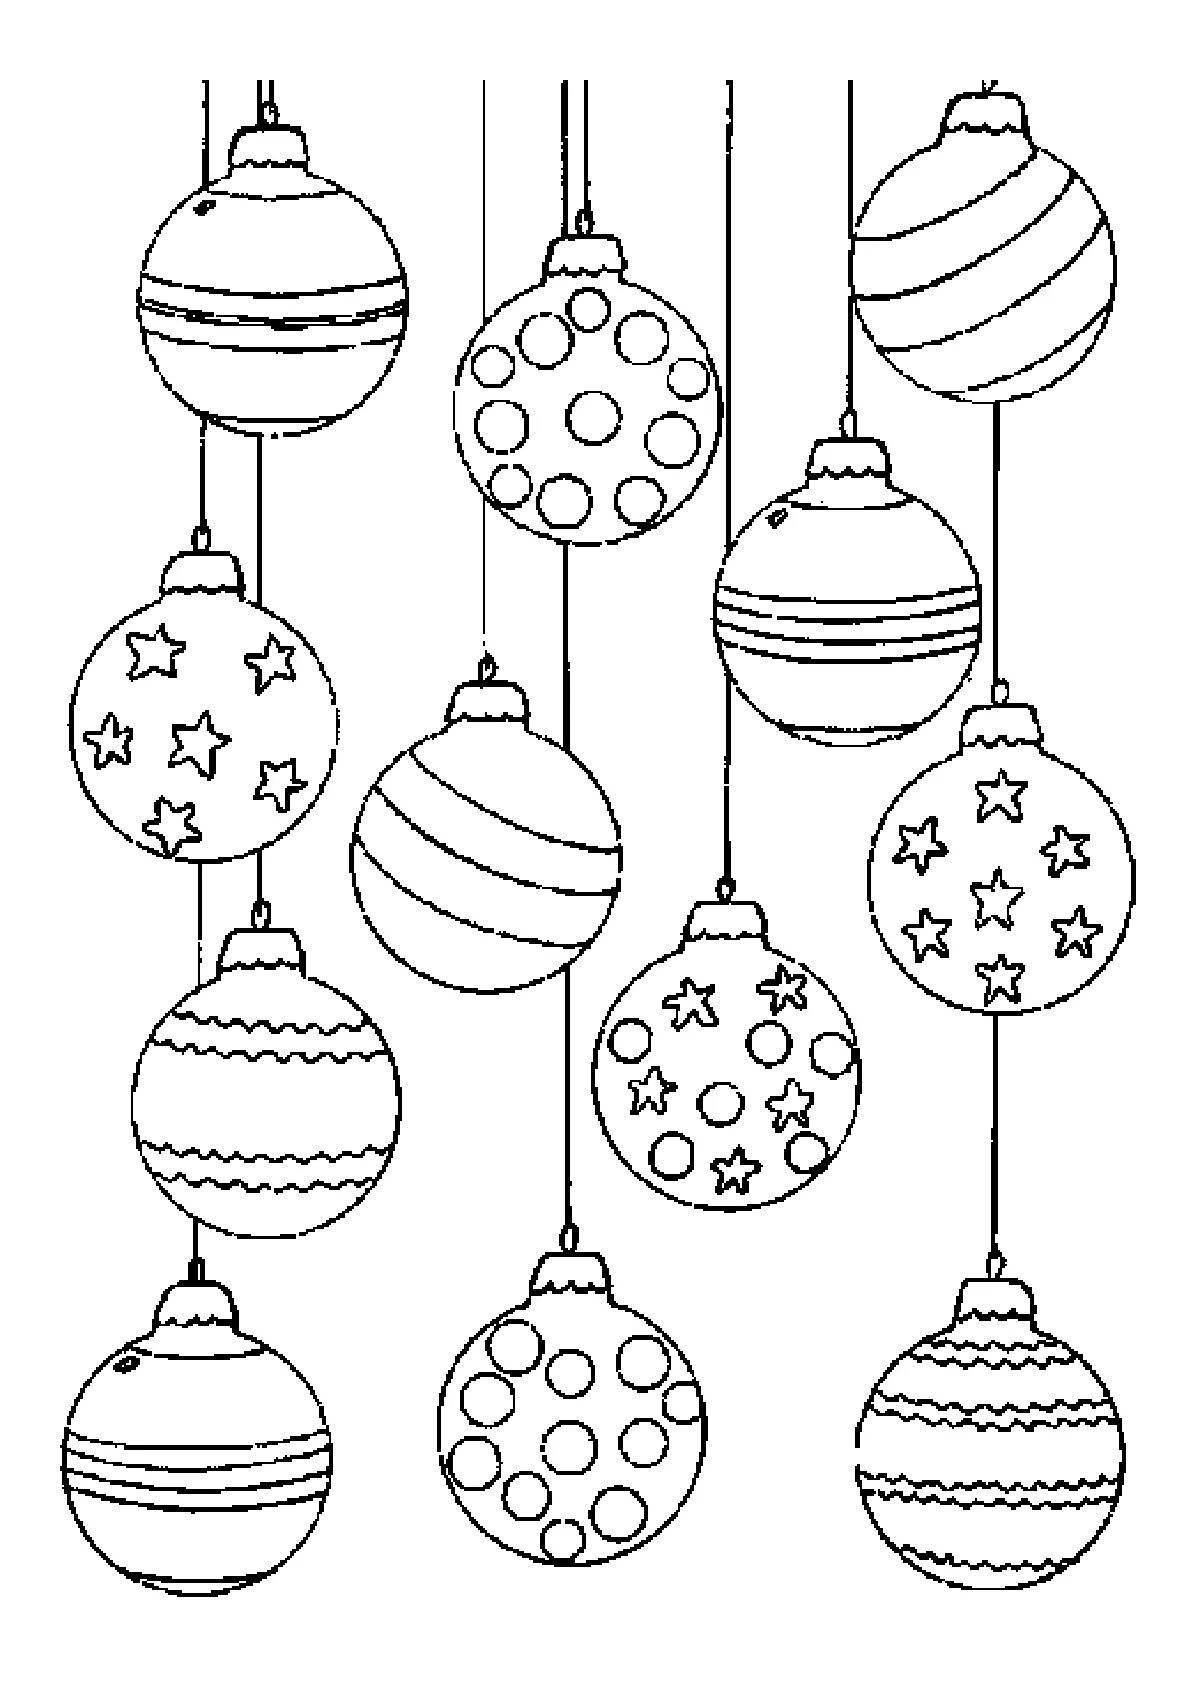 Awesome Christmas decorations for coloring